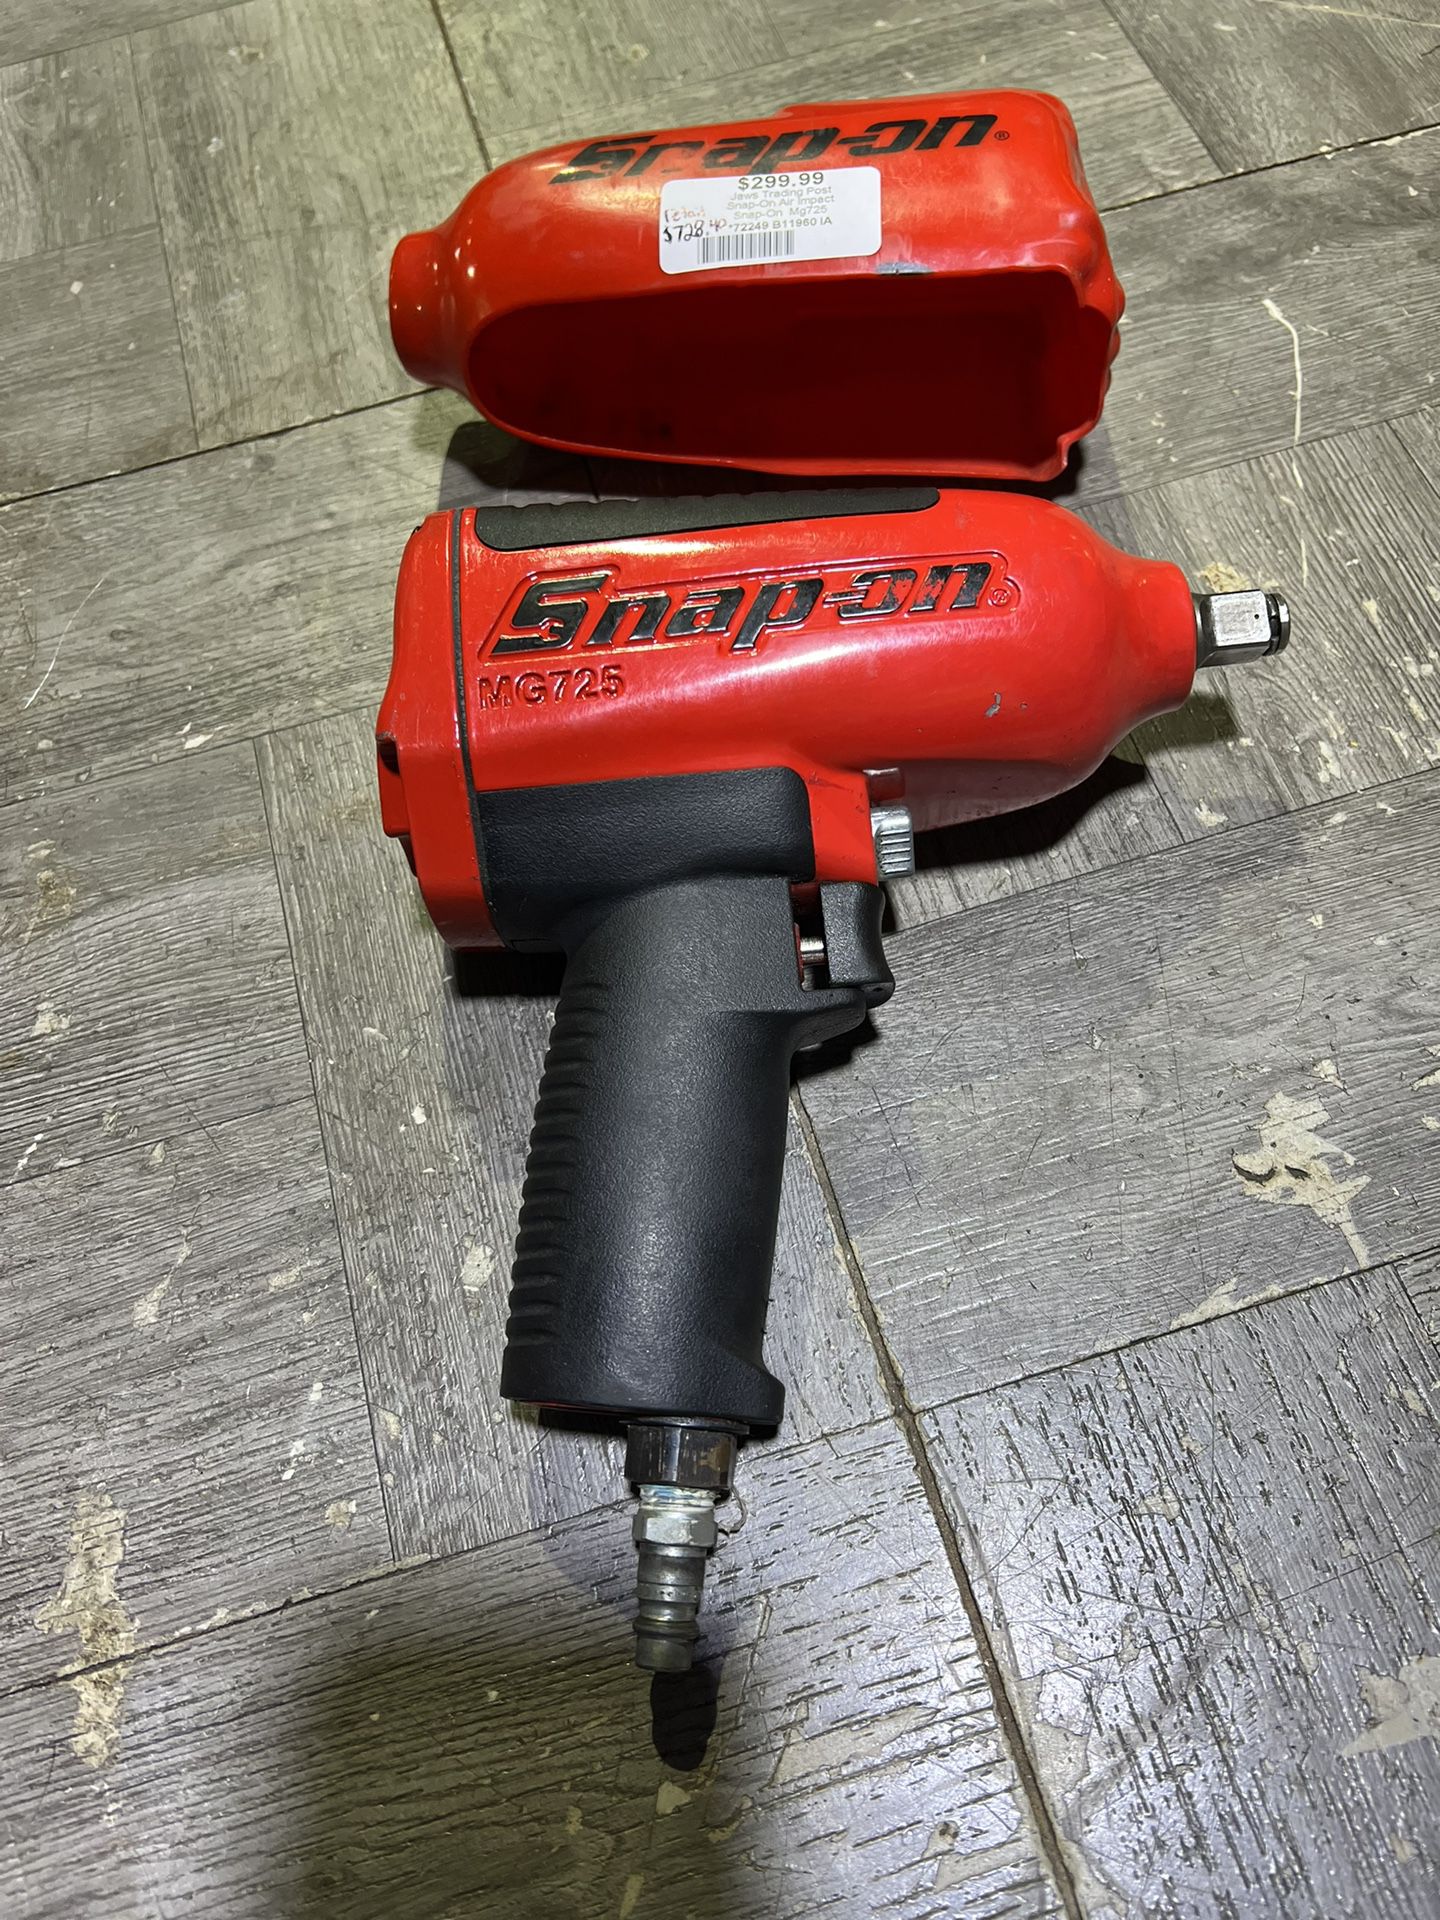 Snap-On Air Impact pick up only retails for $728.40  